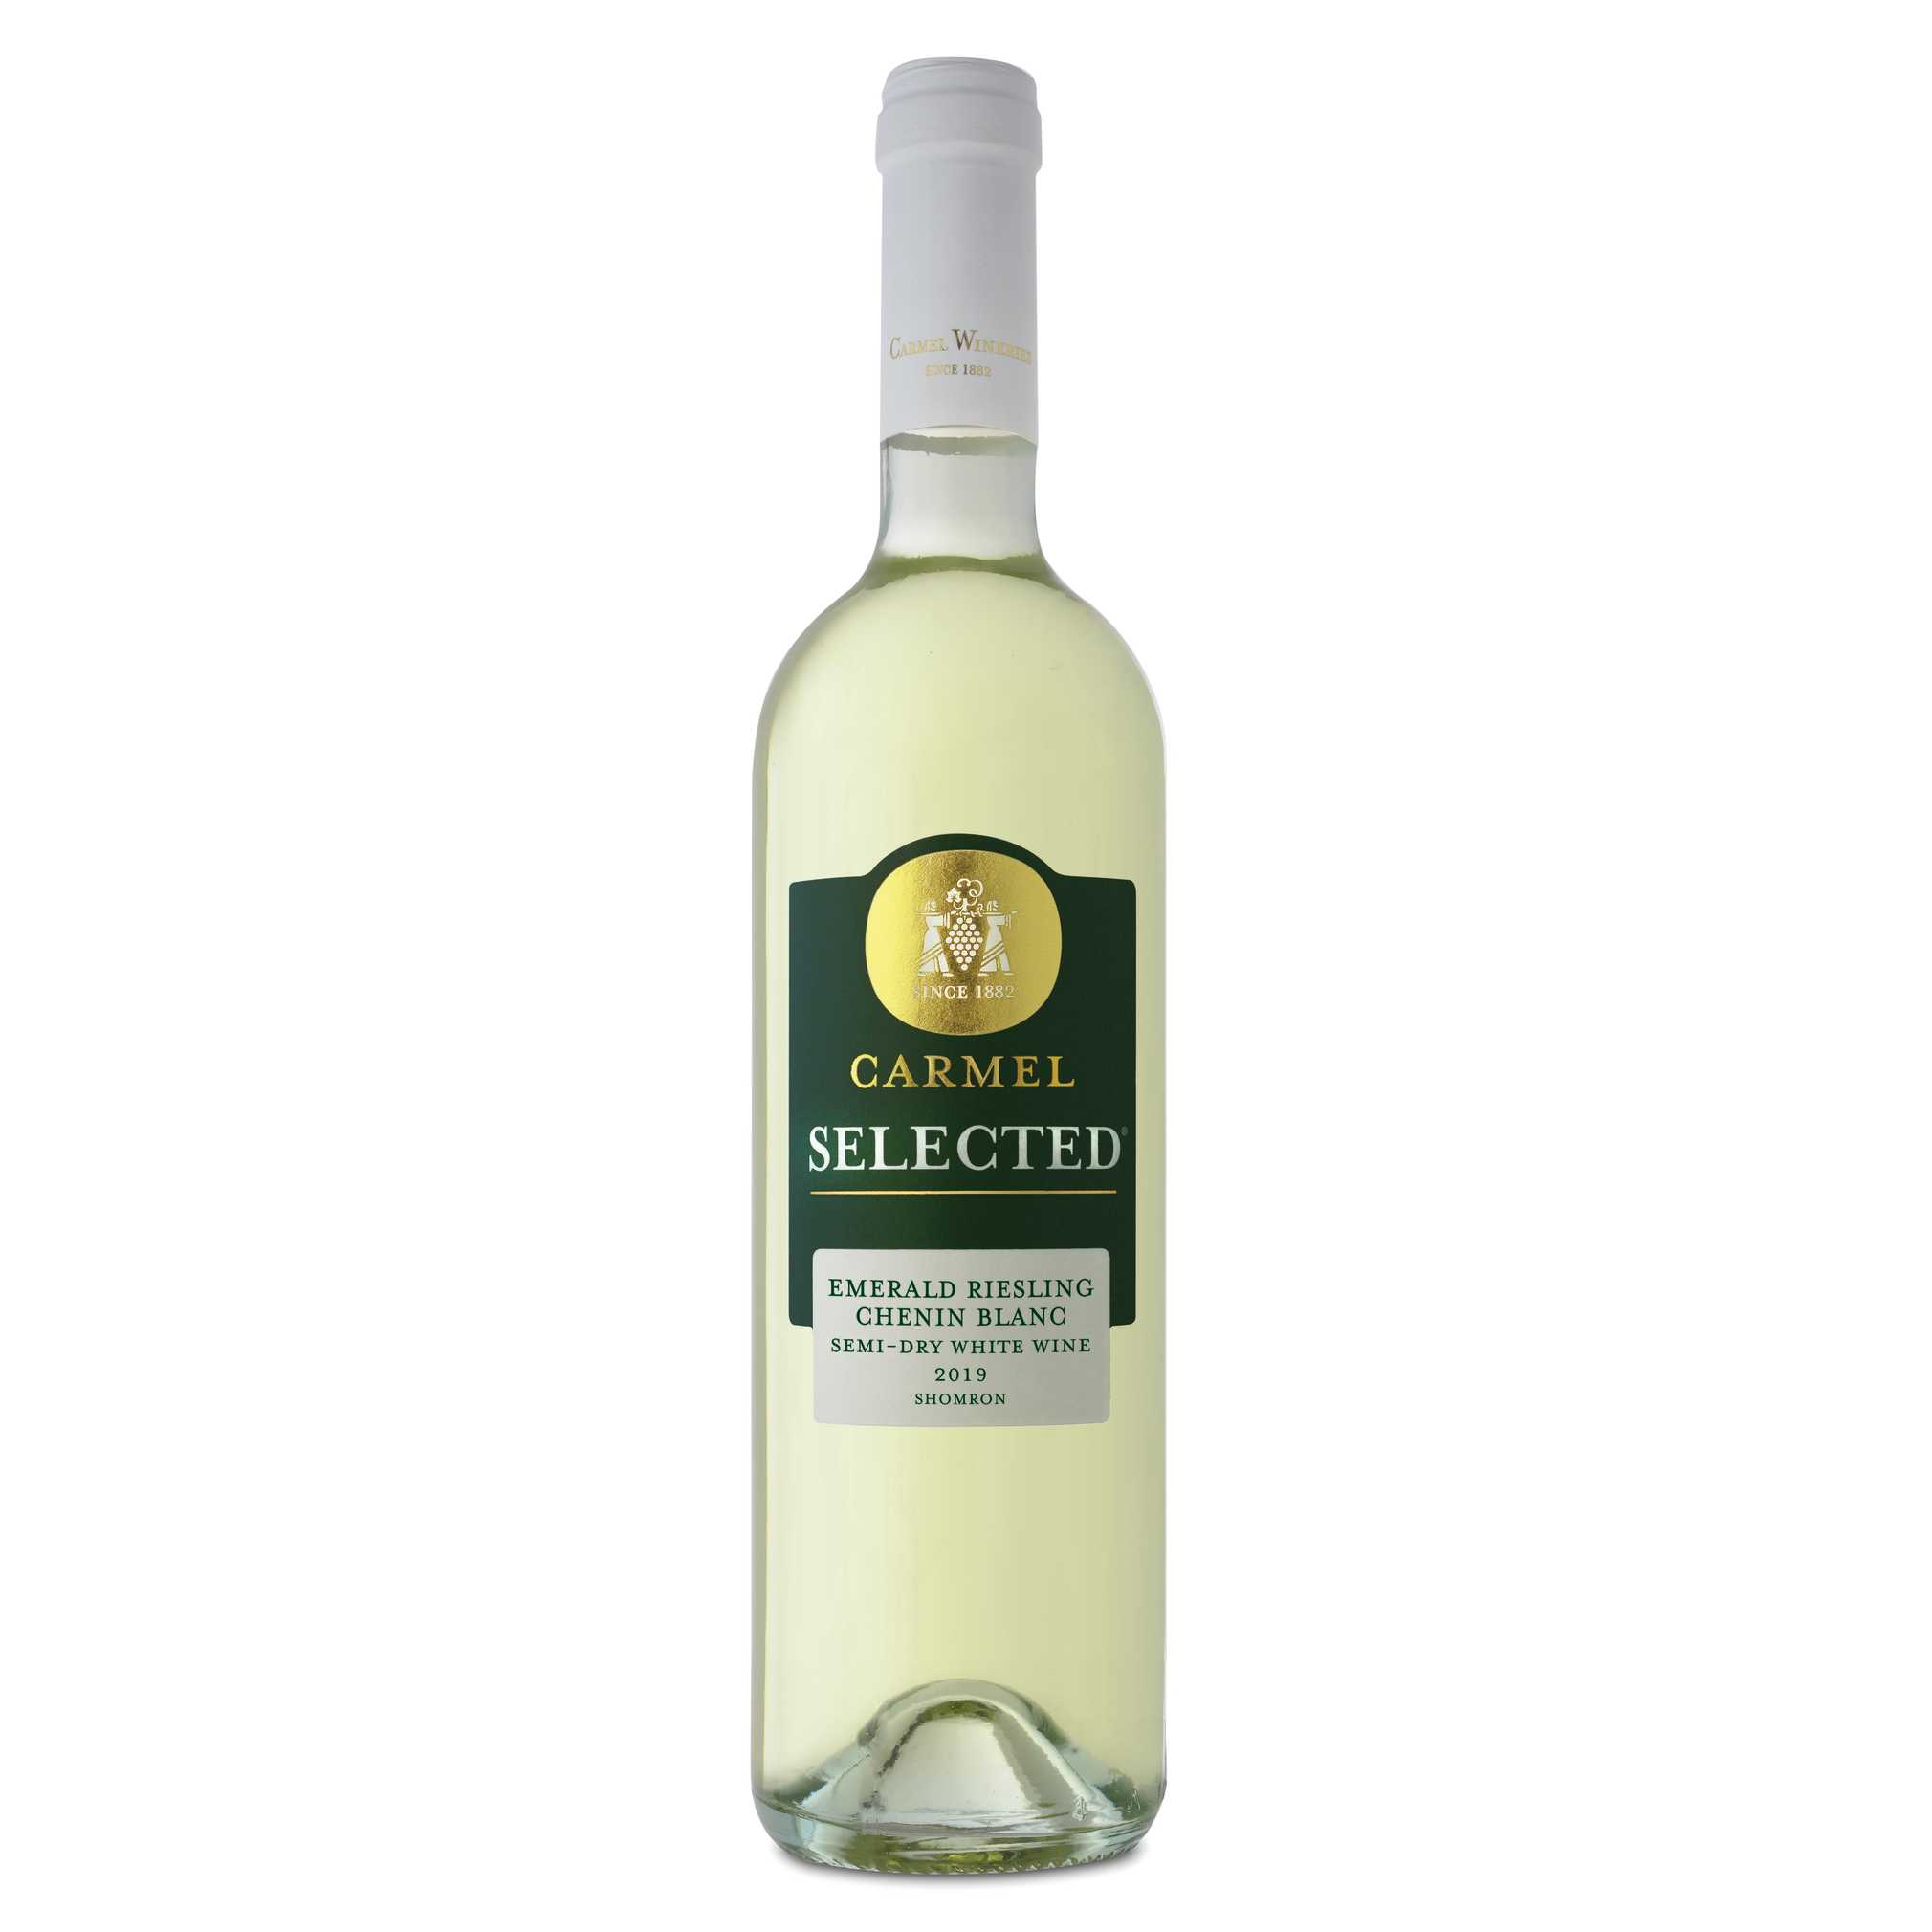 Carmel Selected Emerald Riesling - Chenin Blanc - A Kosher Wine From Israel